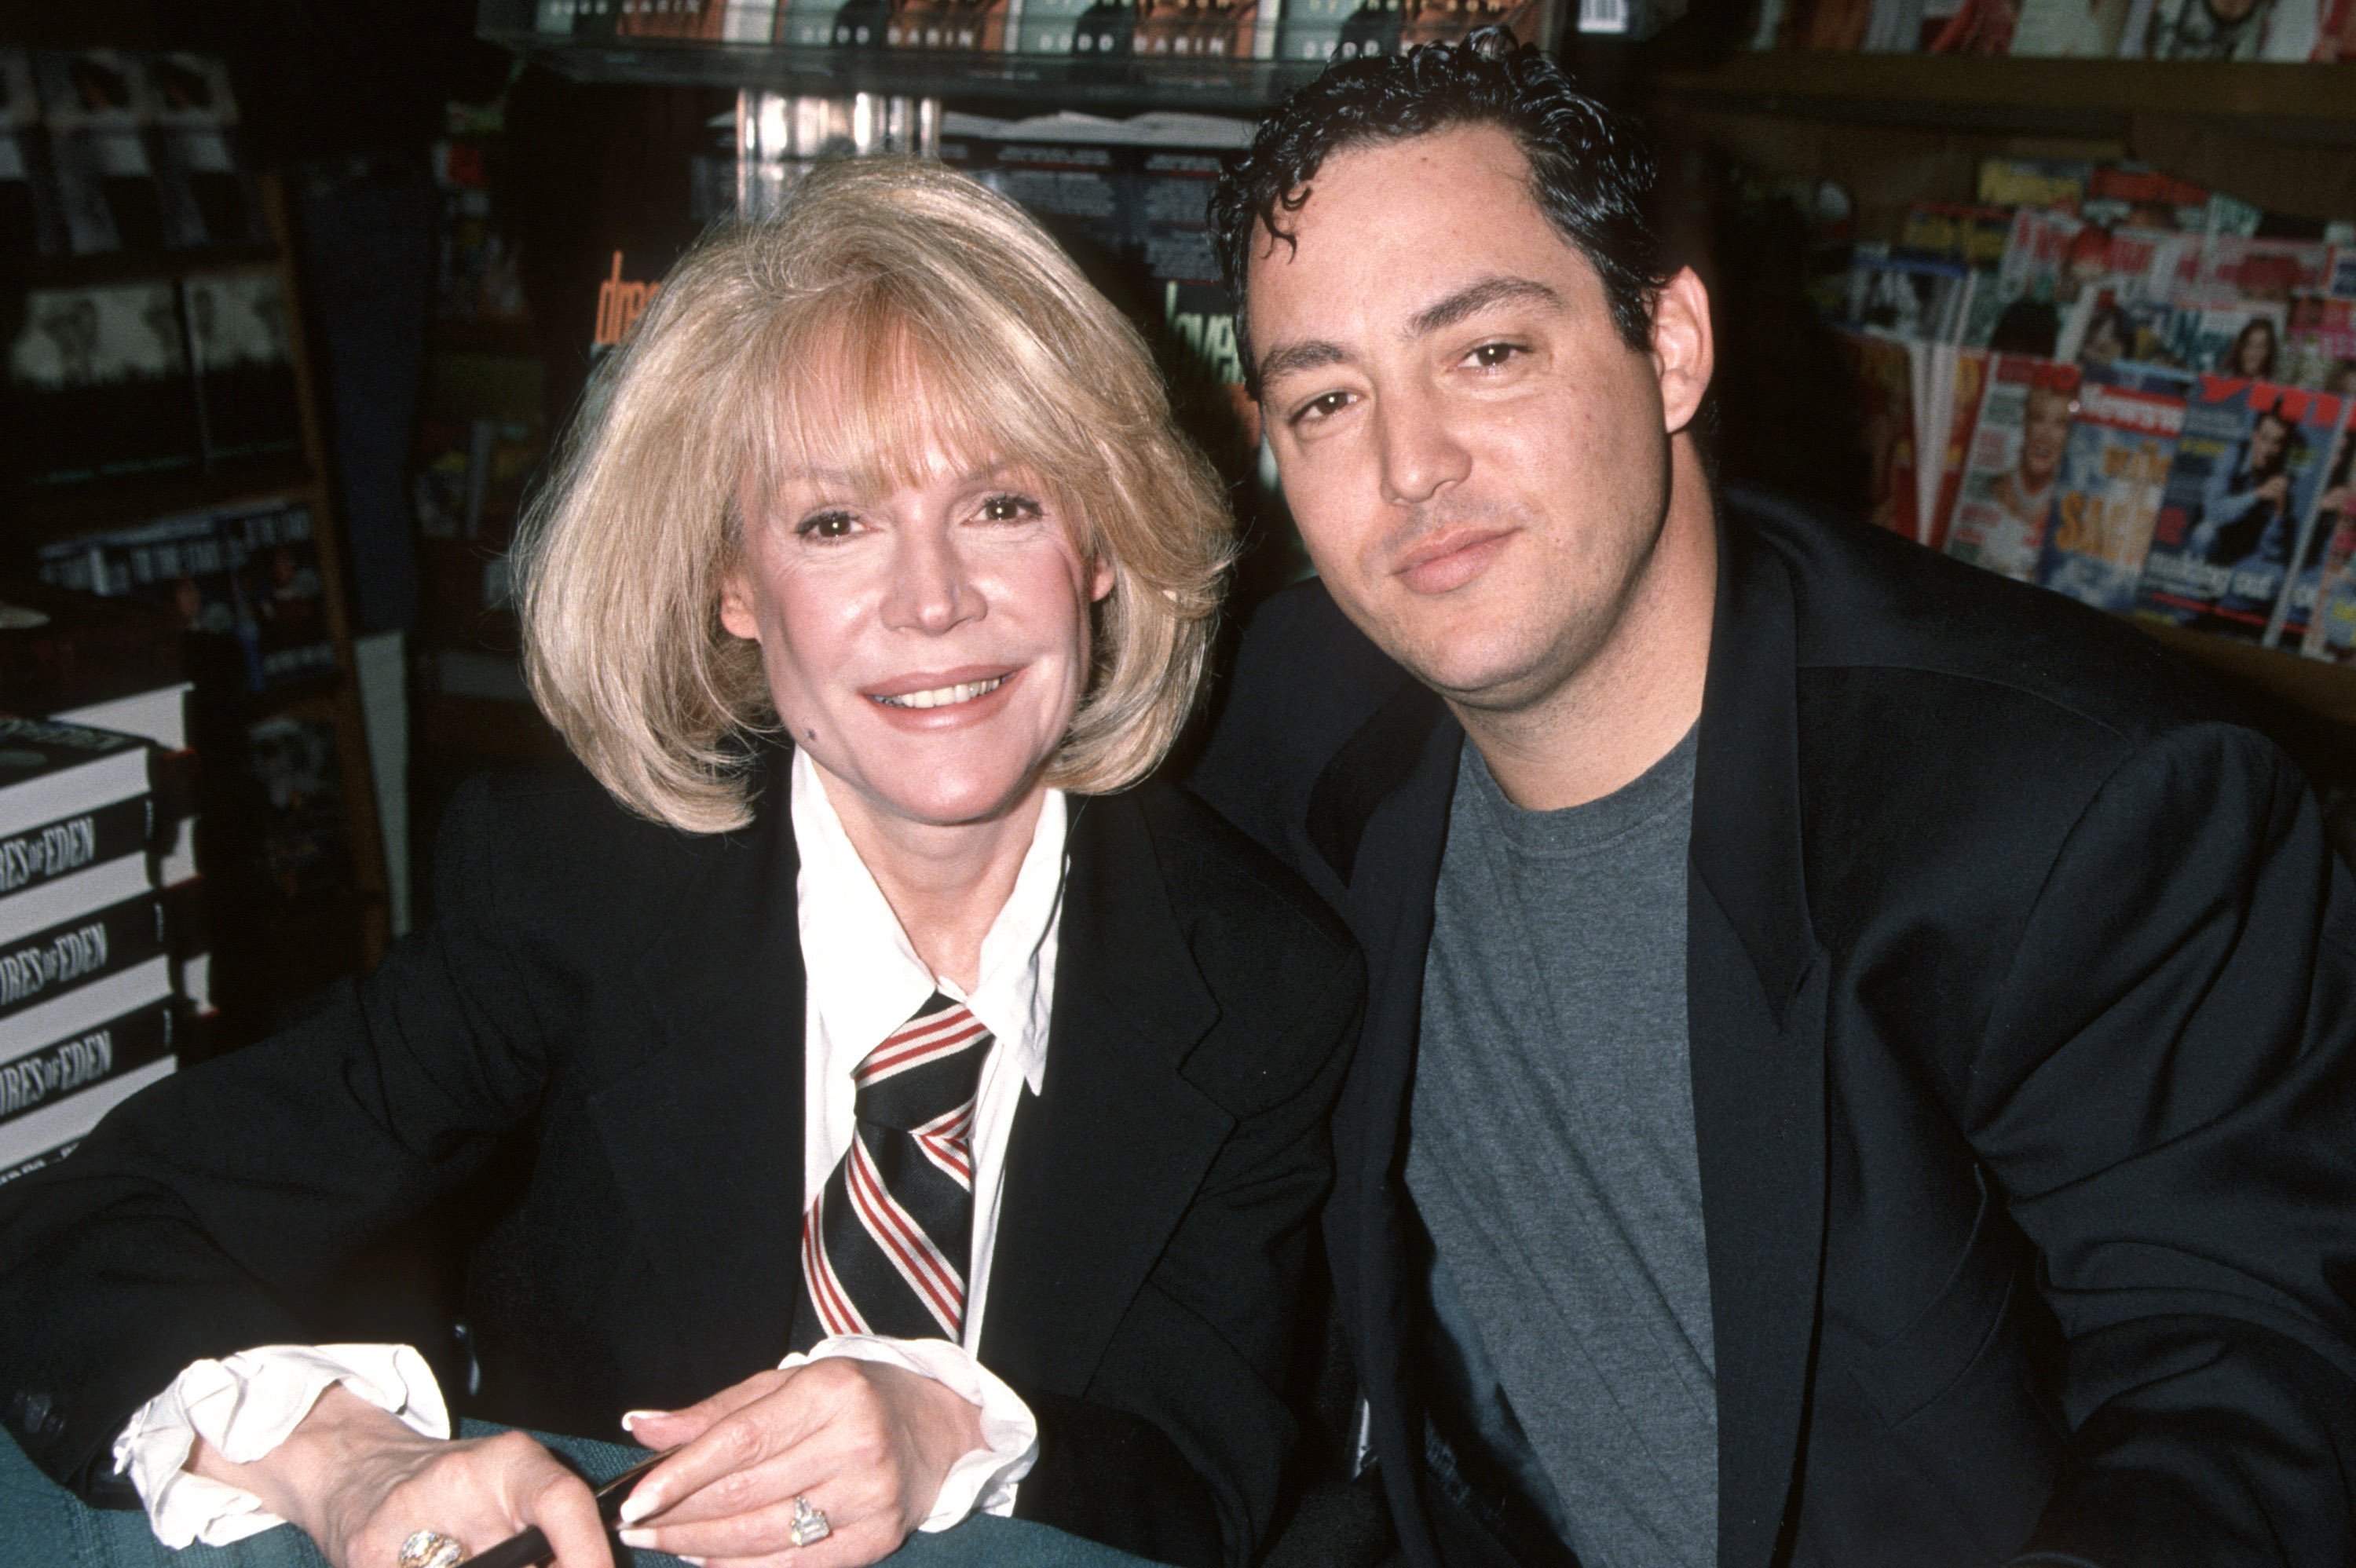 Sandra Dee and Dodd Darin at the former's book signing for "Dreamlovers" on November 26, 1994, in West Hollywood, California | Source: Getty Images